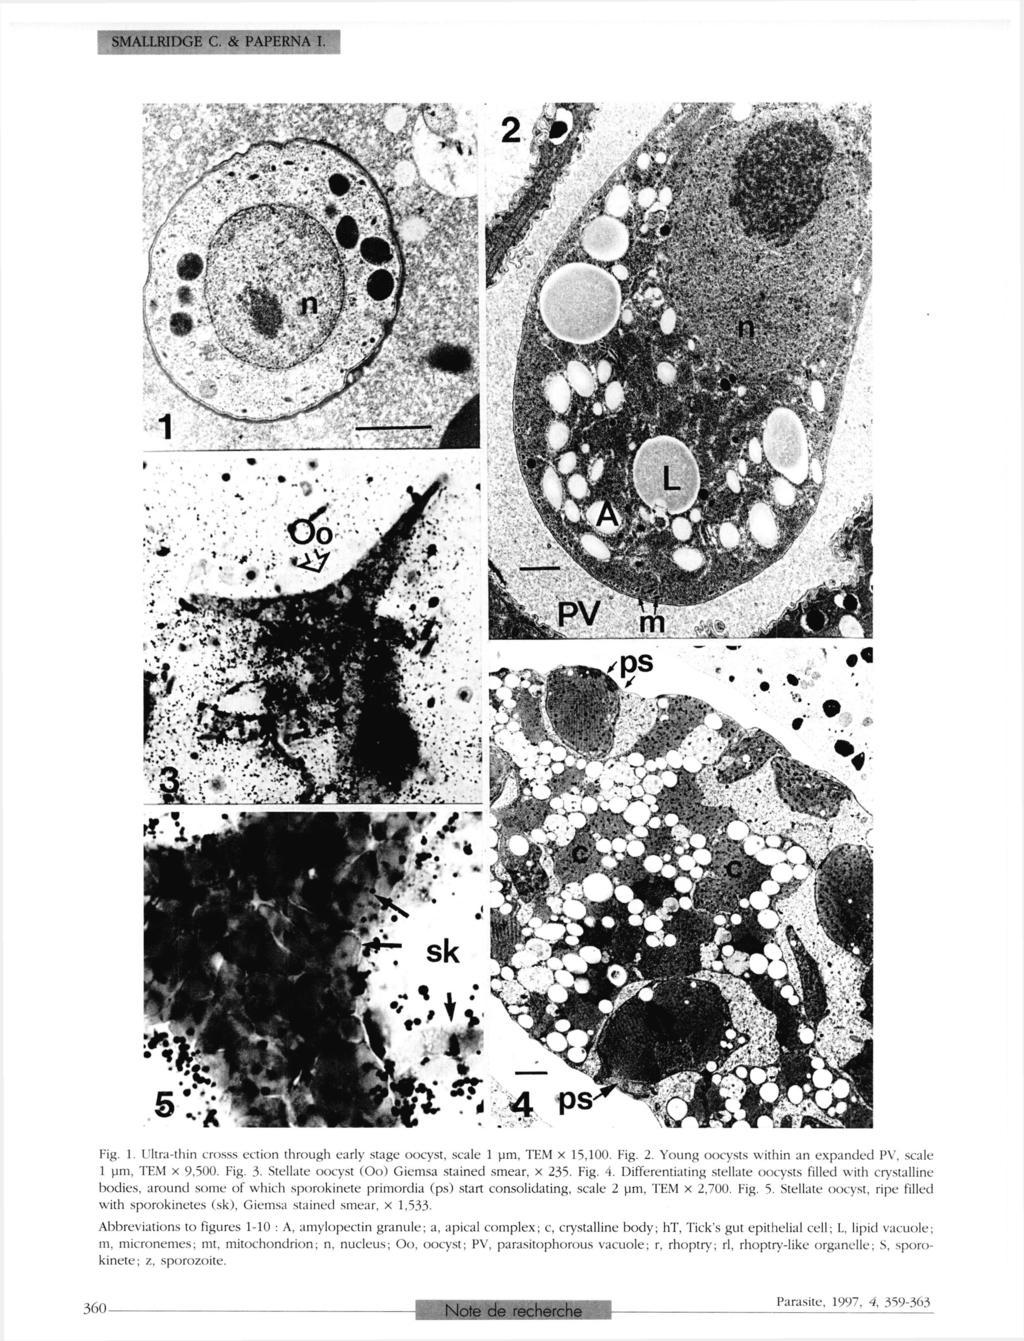 SMALLRIDGE G. & PAPERNA I. Fig. 1. Ultra-thin crosss ection through early stage oocyst, scale 1 µm, ТЕМ χ 15,100. Fig. 2. Young oocysts within an expanded PV. scale 1 pm, ТЕМ χ 9,500. Fig. 3.